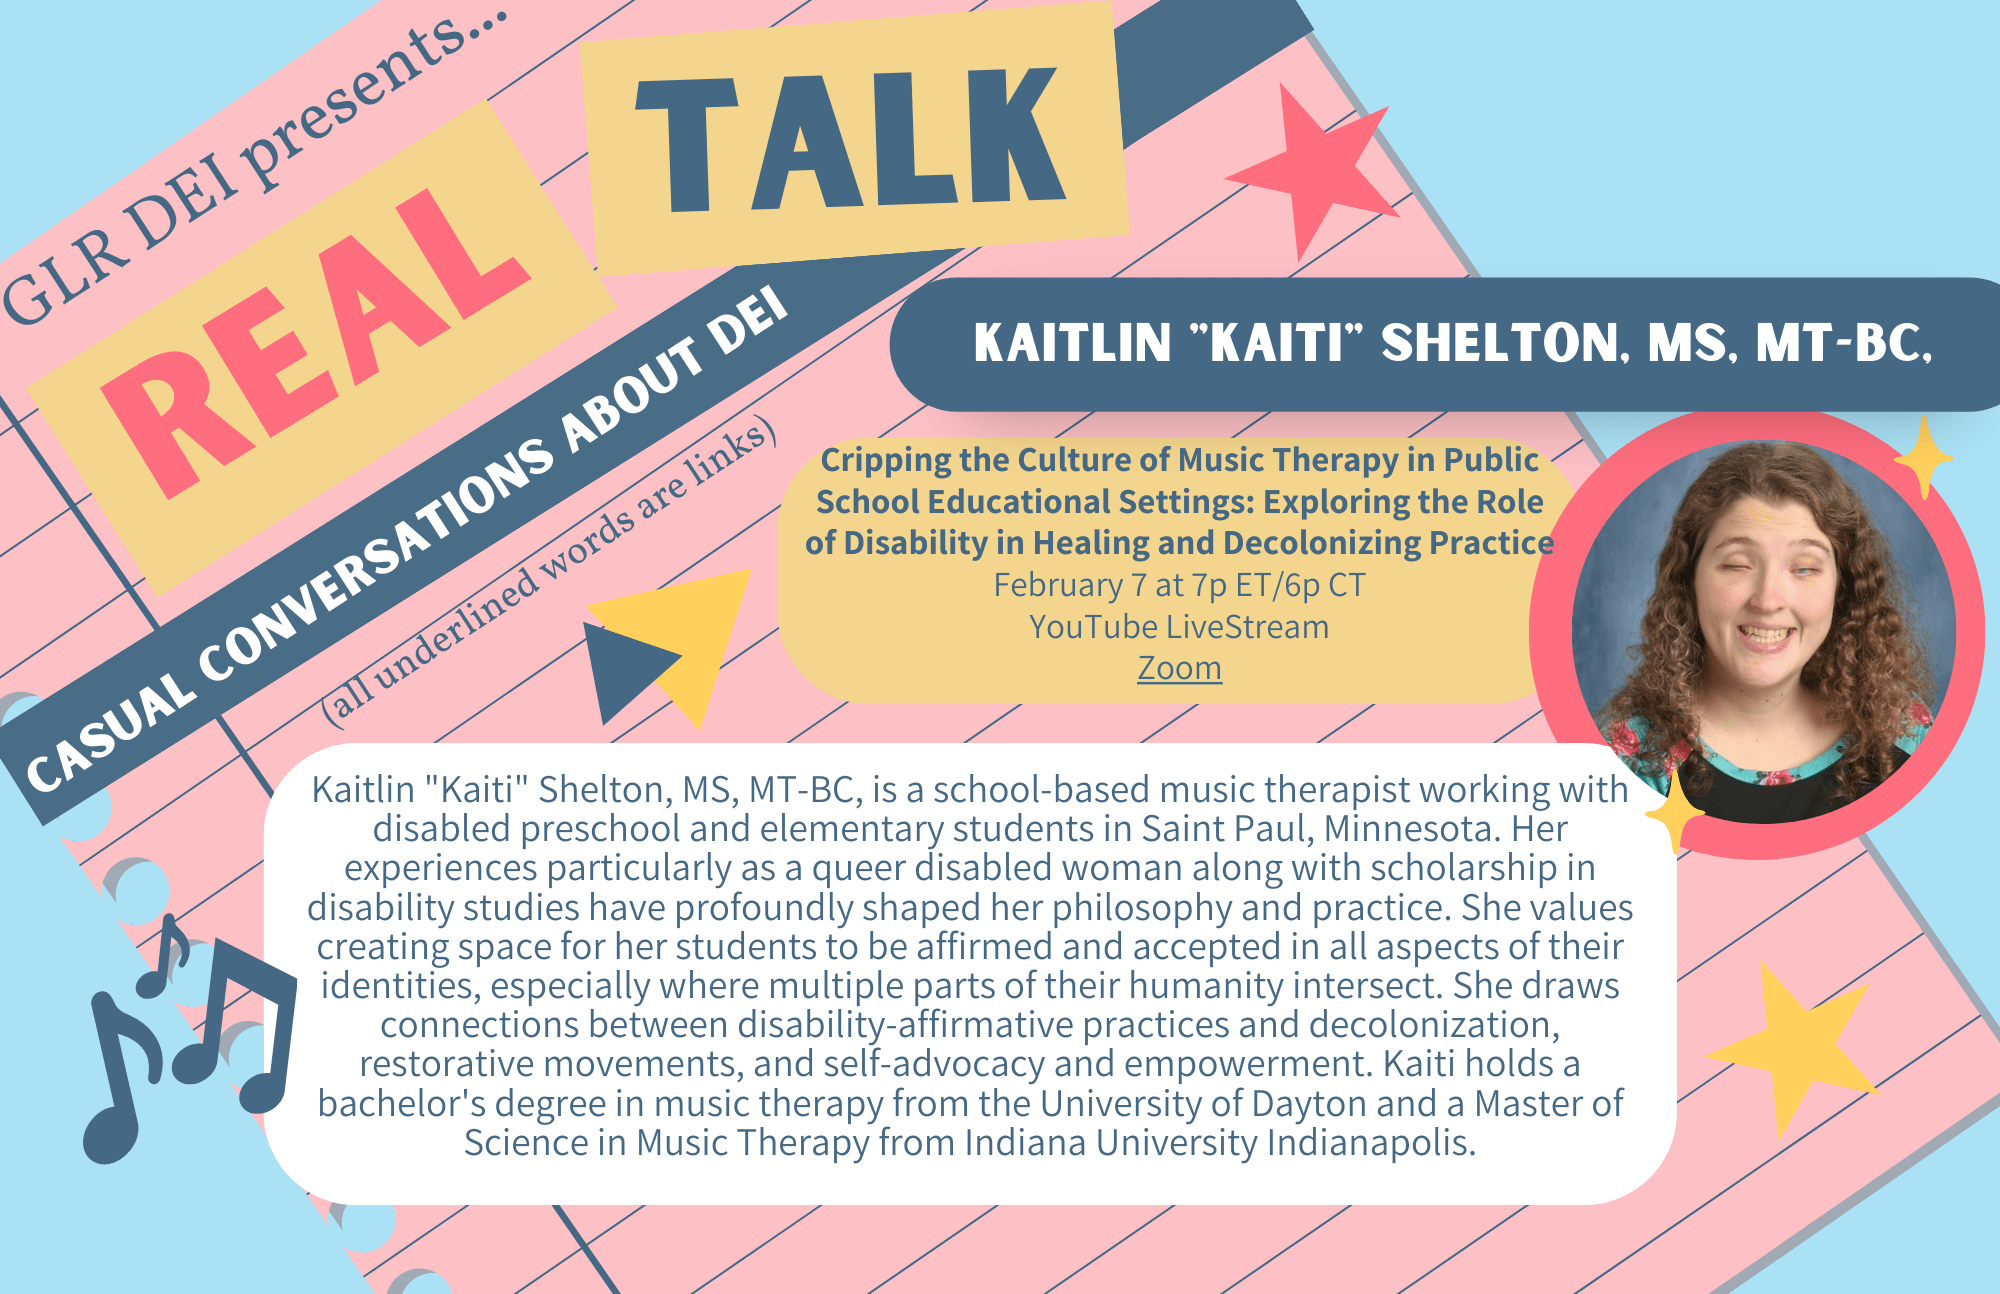 Image of the Real Talk flyer for Kaiti Shelton. Text in image is included in post.